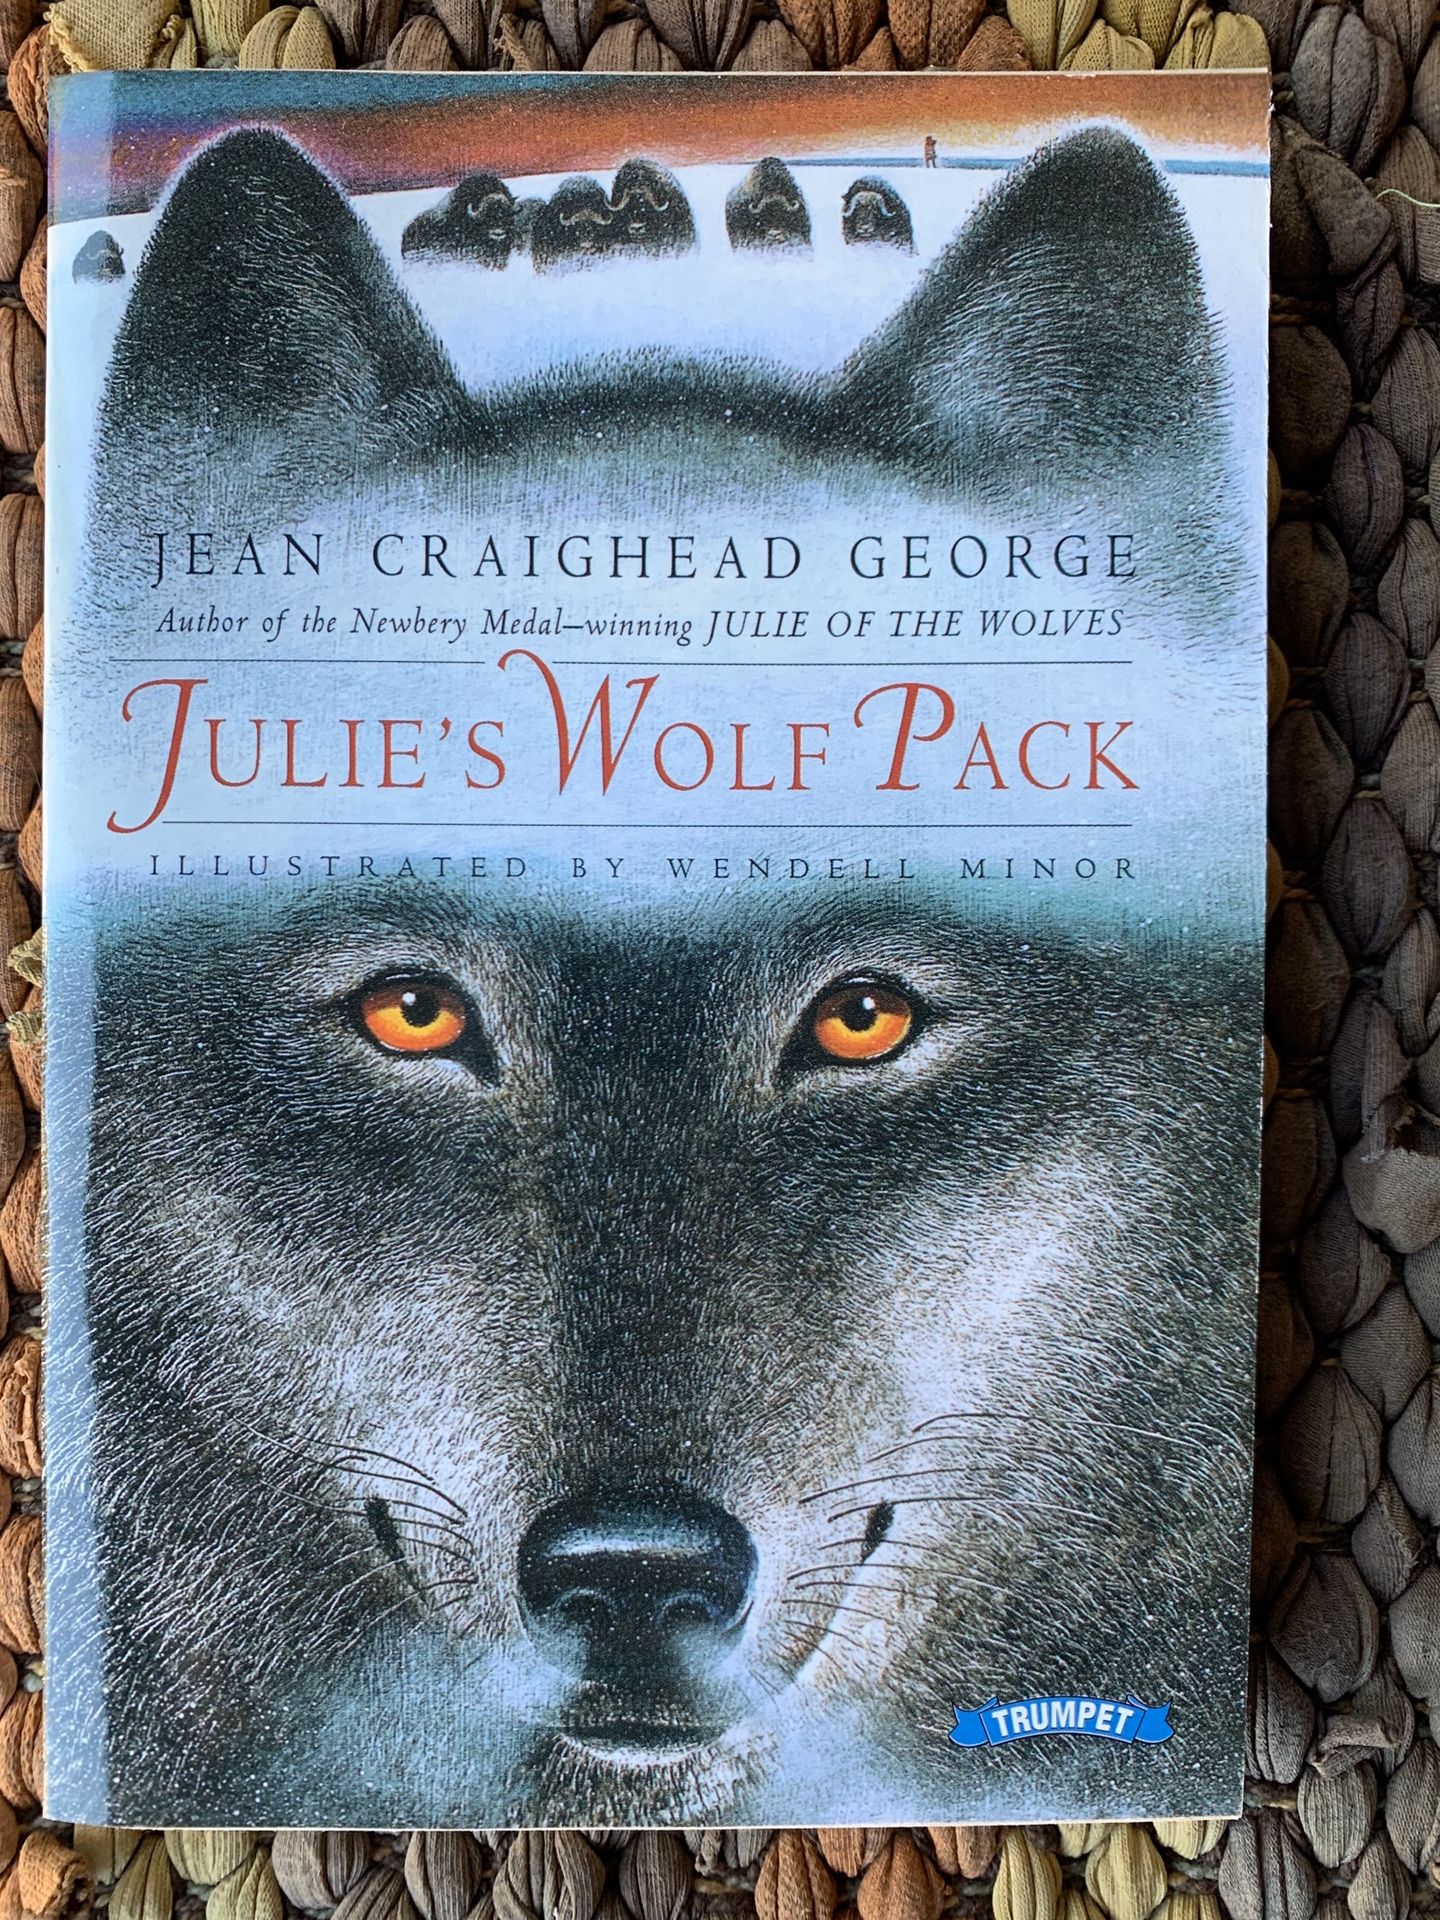 Class Set - Julie’s Wolf Pack by Jean Craighead George